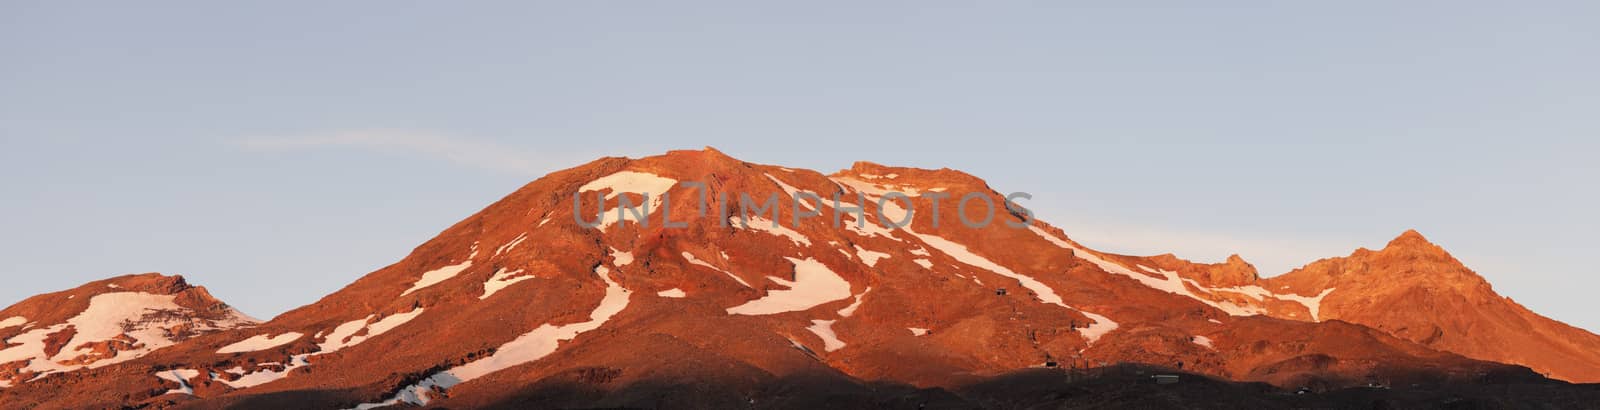 Red mountains in Tongarino National Park by benkrut